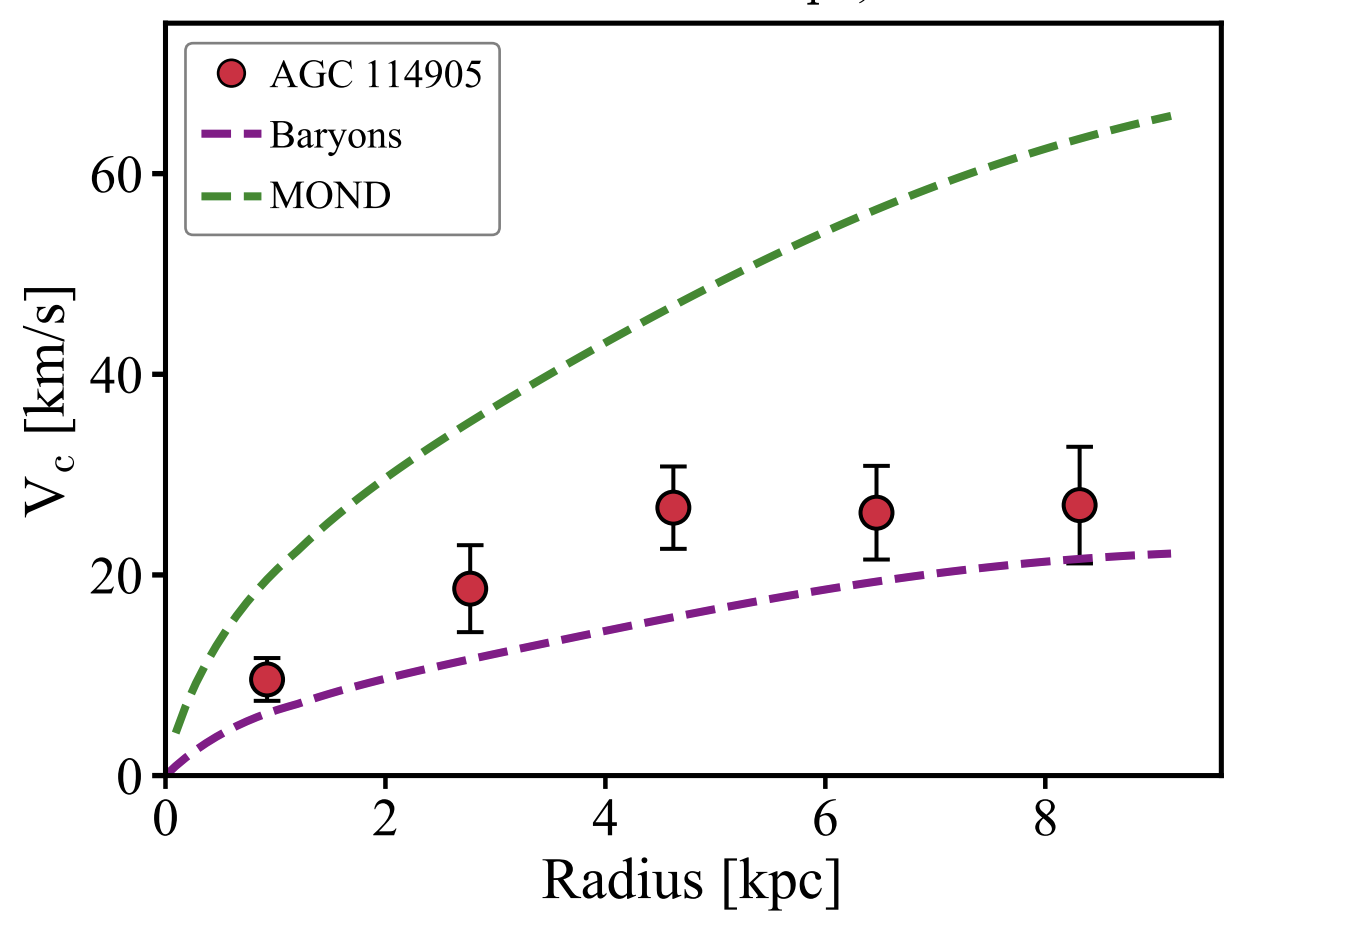 A graph of the dependence of the speed of rotation of matter in the galaxy AGC 114905 from the distance to its center. Red circles indicate observational data, the purple line is the velocity of matter determined by the observed baryonic matter in the standard theory of gravity, and the green line is the prediction of MOND. Credit: PEM Piña et al. / arXiv.org, 2021